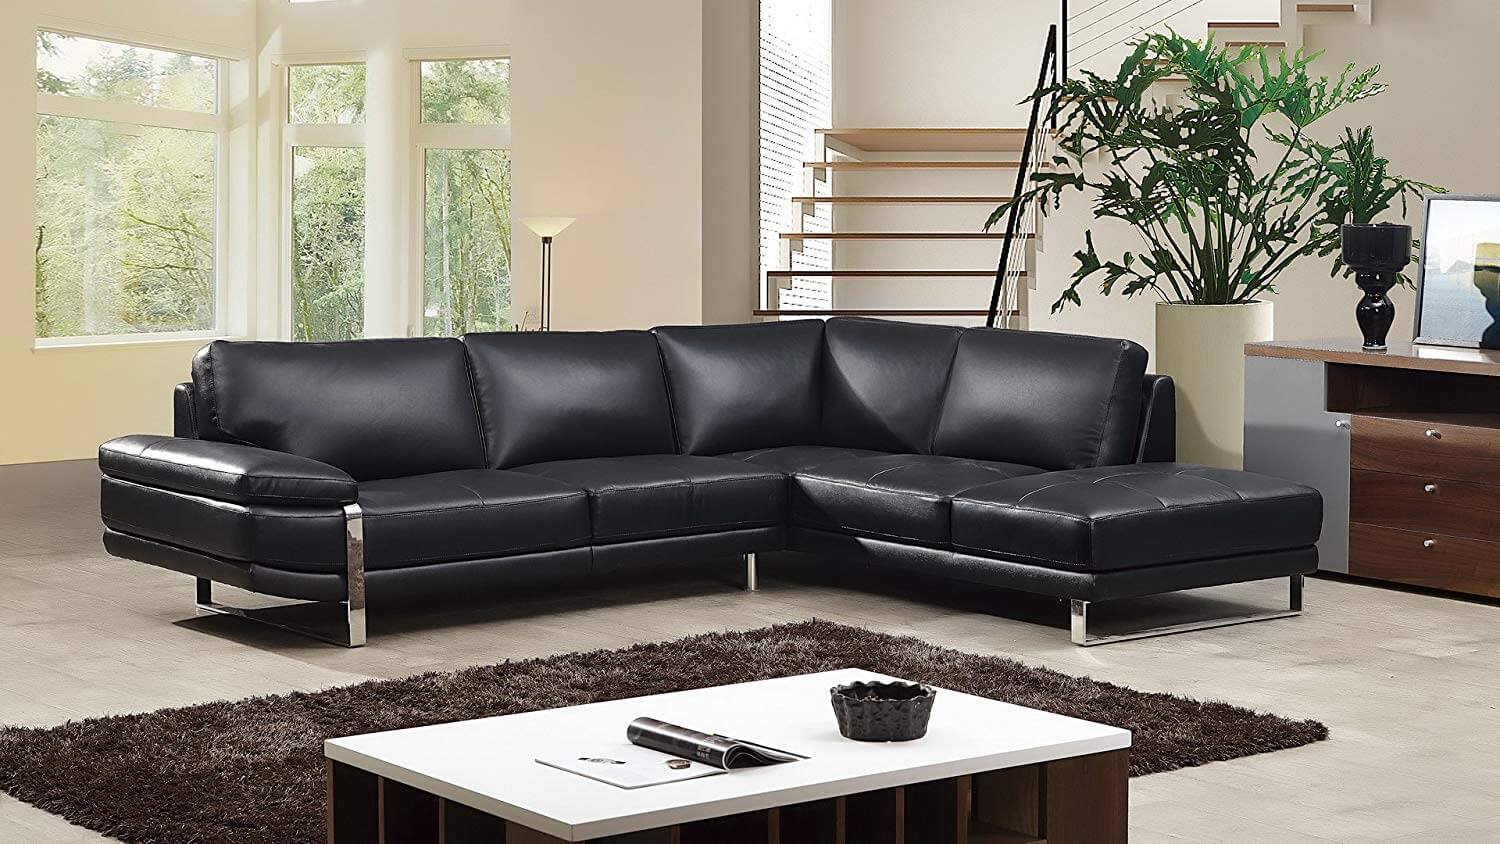 Best Leather Sofa Brands, Best Brand Leather Sofa